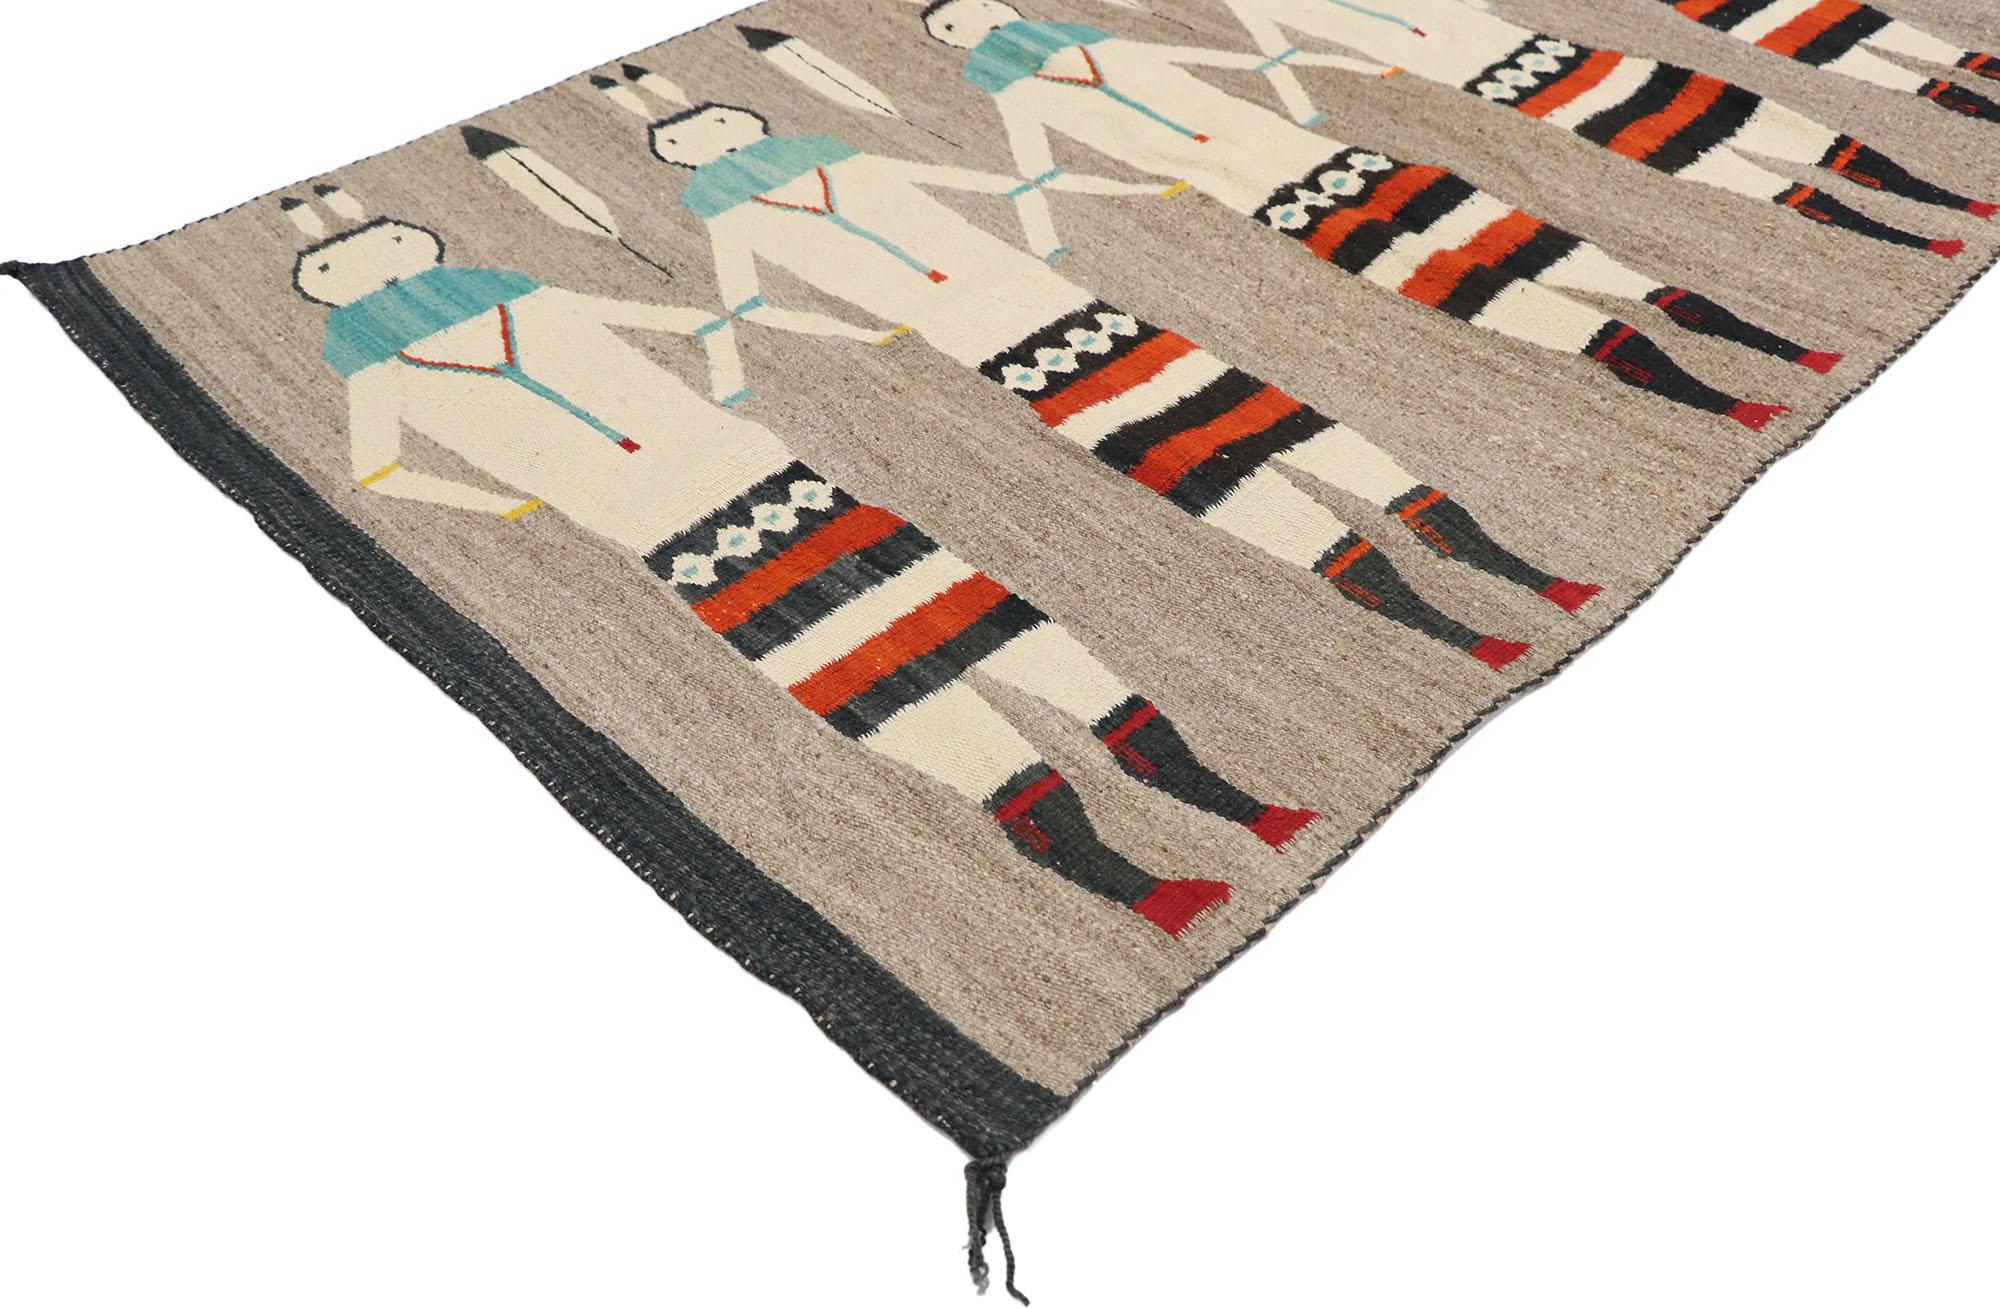 77768 Vintage Navajo Yeibichai Rug, 02'11 x 04'04. Yeibichai Navajo rugs are a distinctive type of Navajo weaving that depict figures from the Yeibichai dance, a central element of the Navajo Nightway healing ceremony. These rugs feature intricate